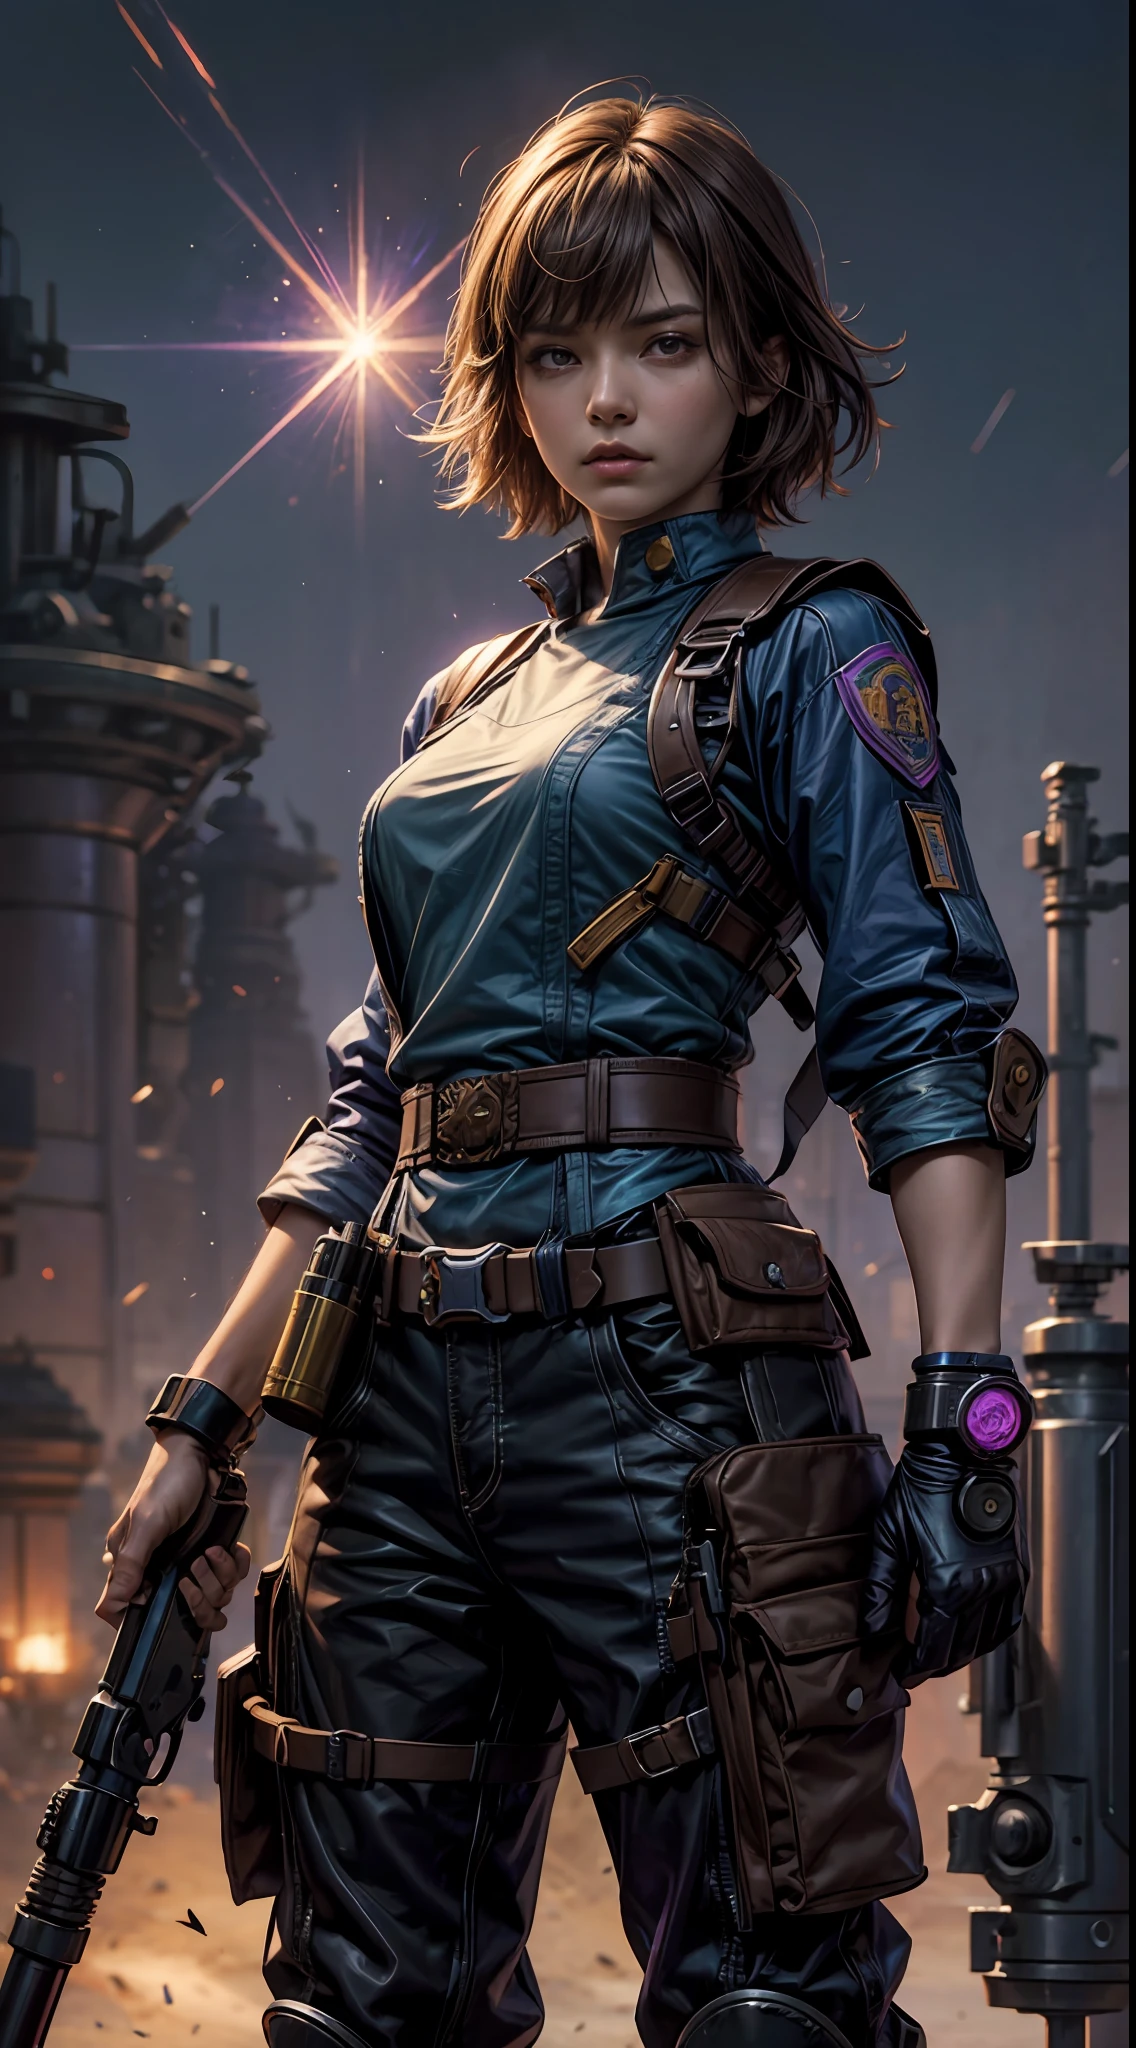 Female warrior monk with short light brown hair, Purple and blue short-sleeved shirt match, hand-held large, state-of-the-art sci fi firearm, Stand against a vintage sci-fi background. The artwork was inspired by Moebius and Ashley Wood...